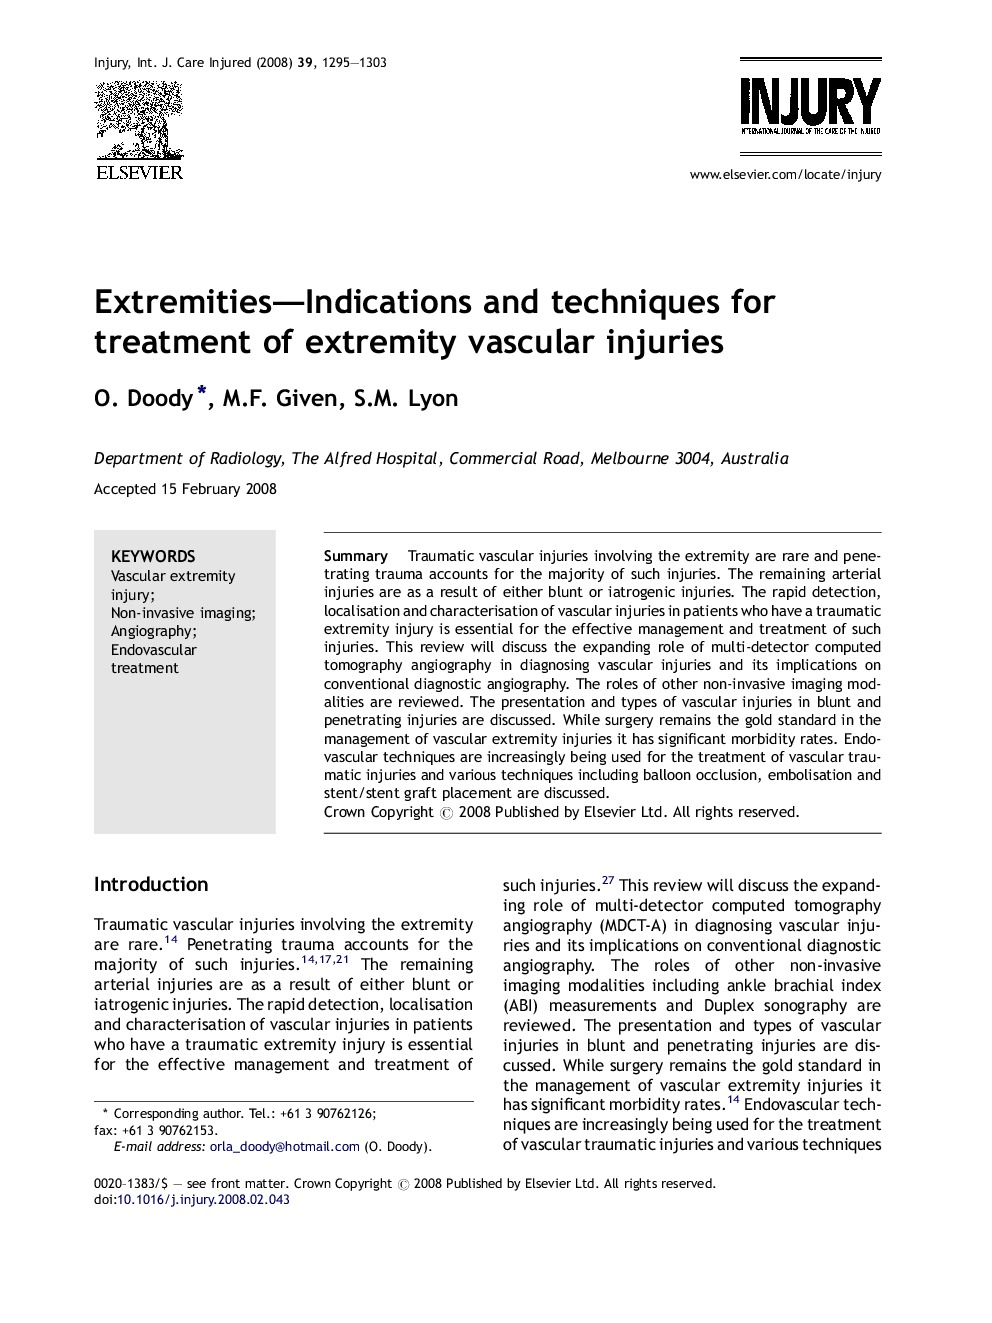 Extremities—Indications and techniques for treatment of extremity vascular injuries